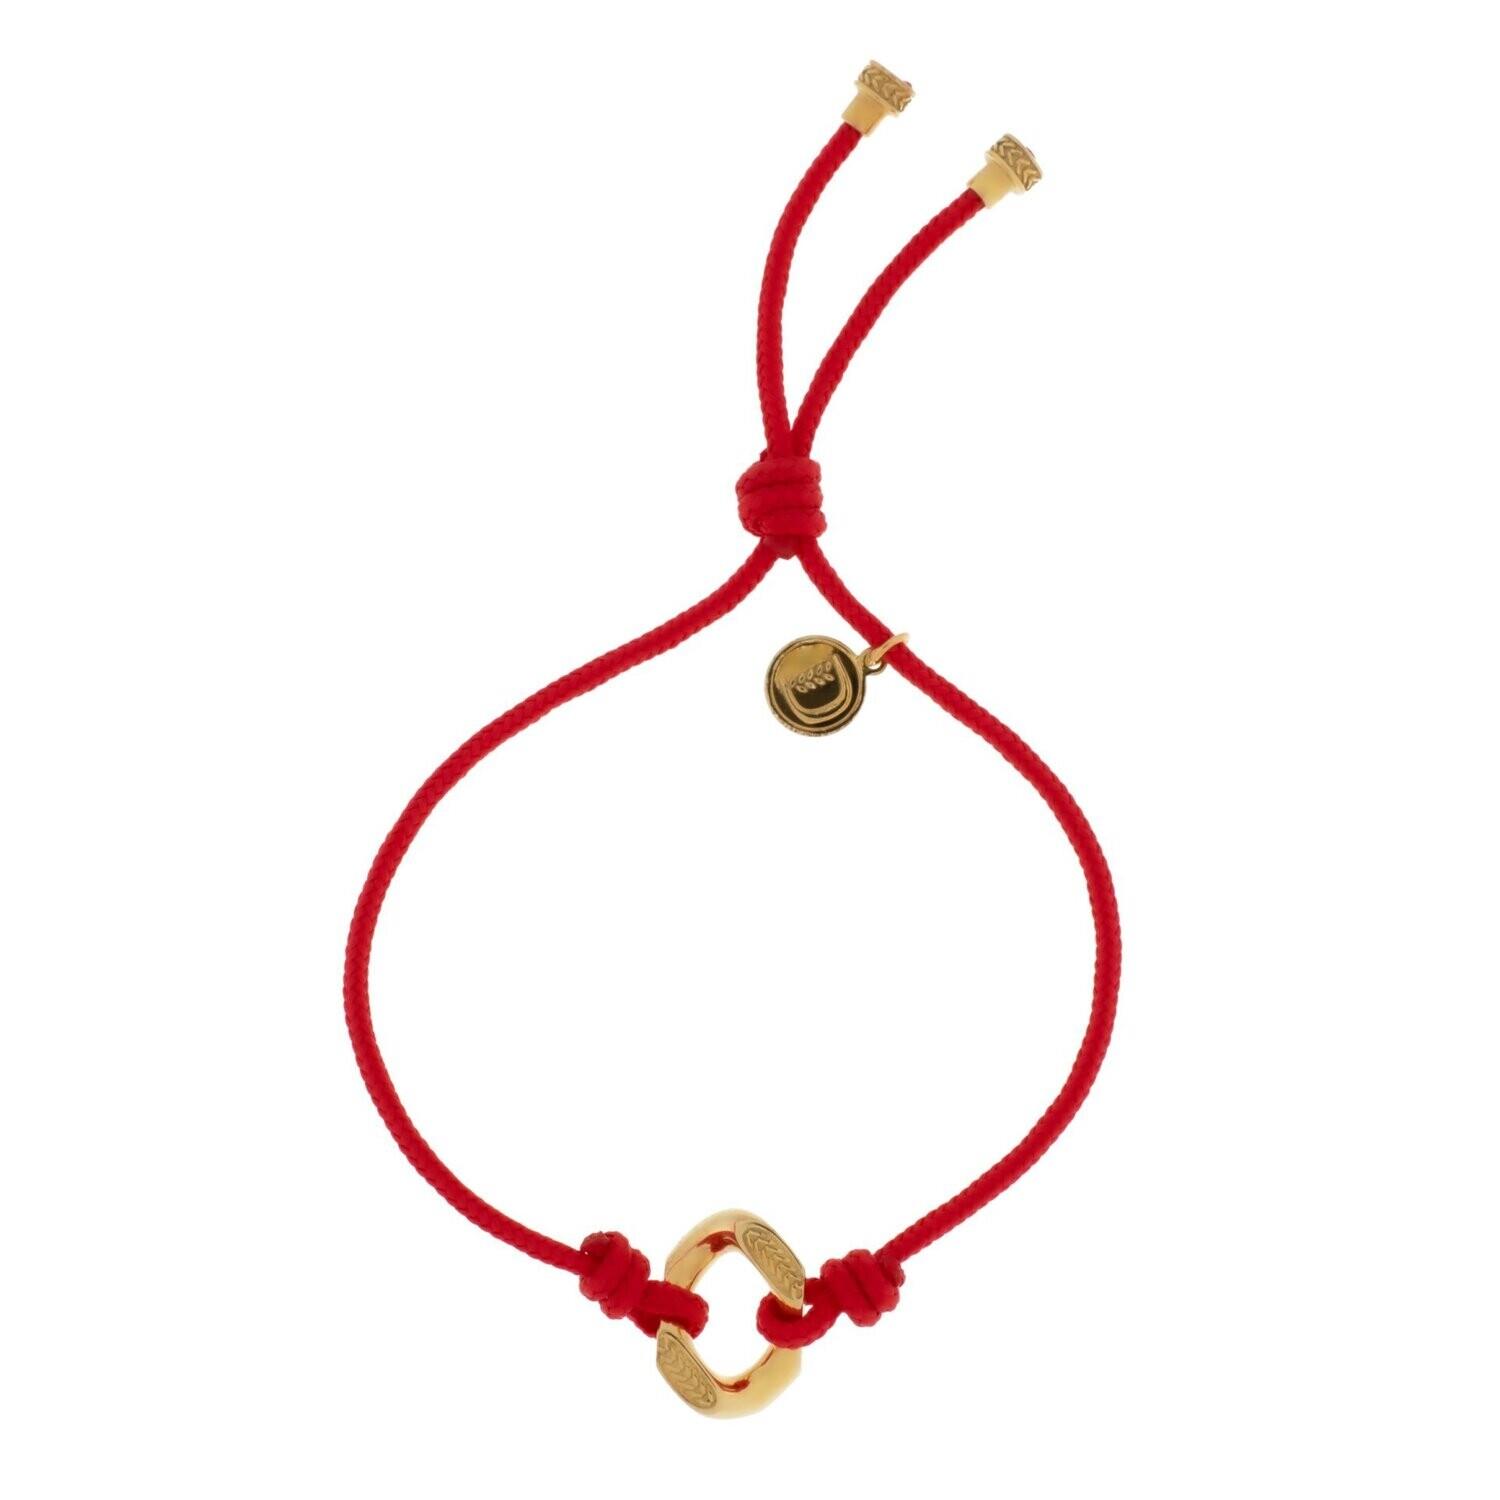 Bracciale tessuto rosso Rock charm in argento - DUEAERRE 1938